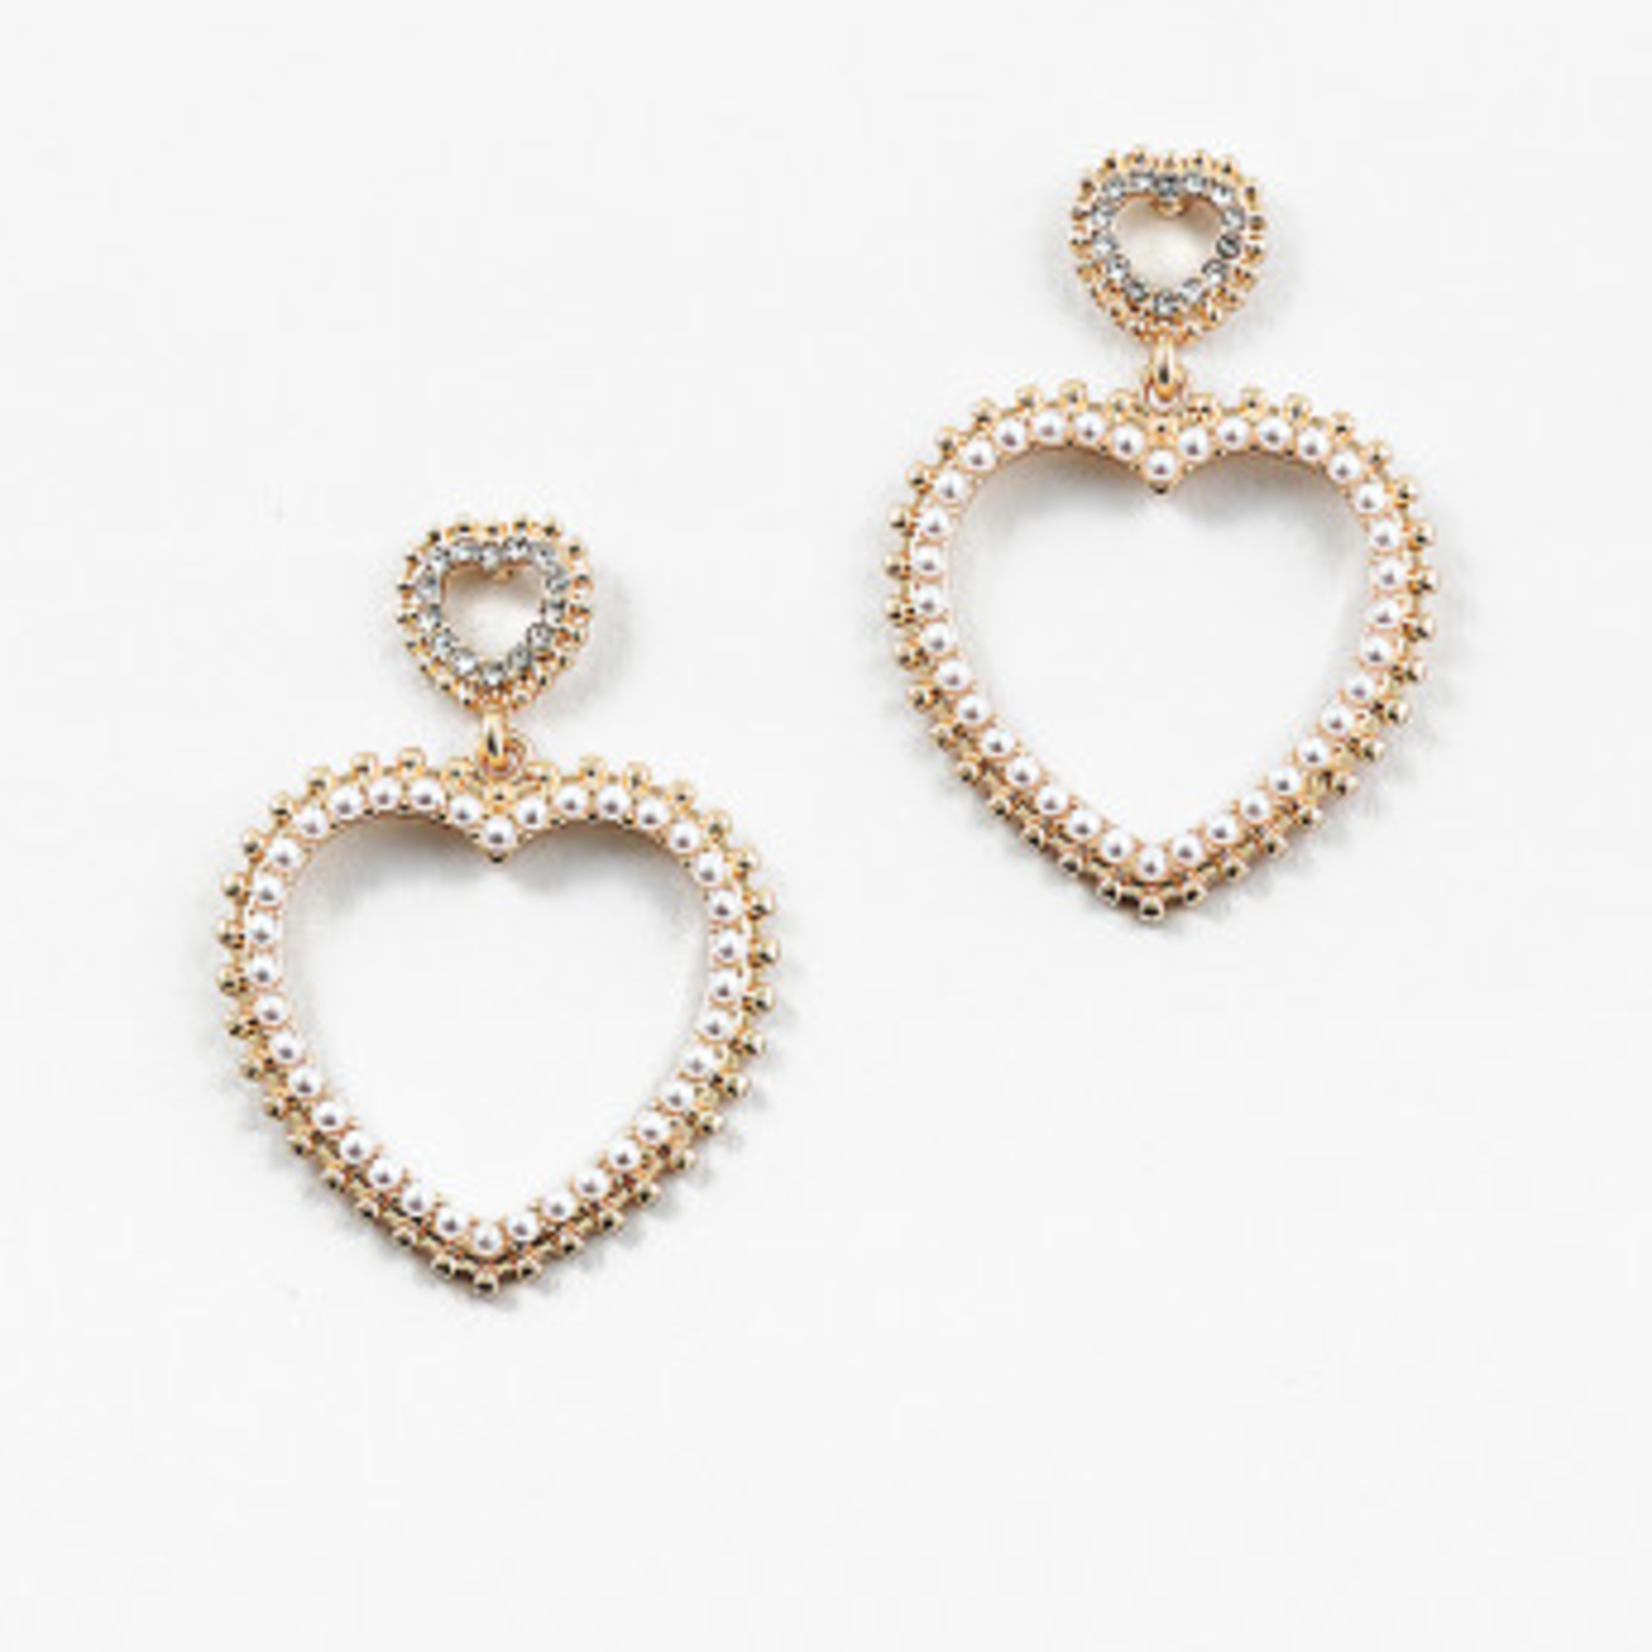 Gold and Pearl Heart Statement Earrings